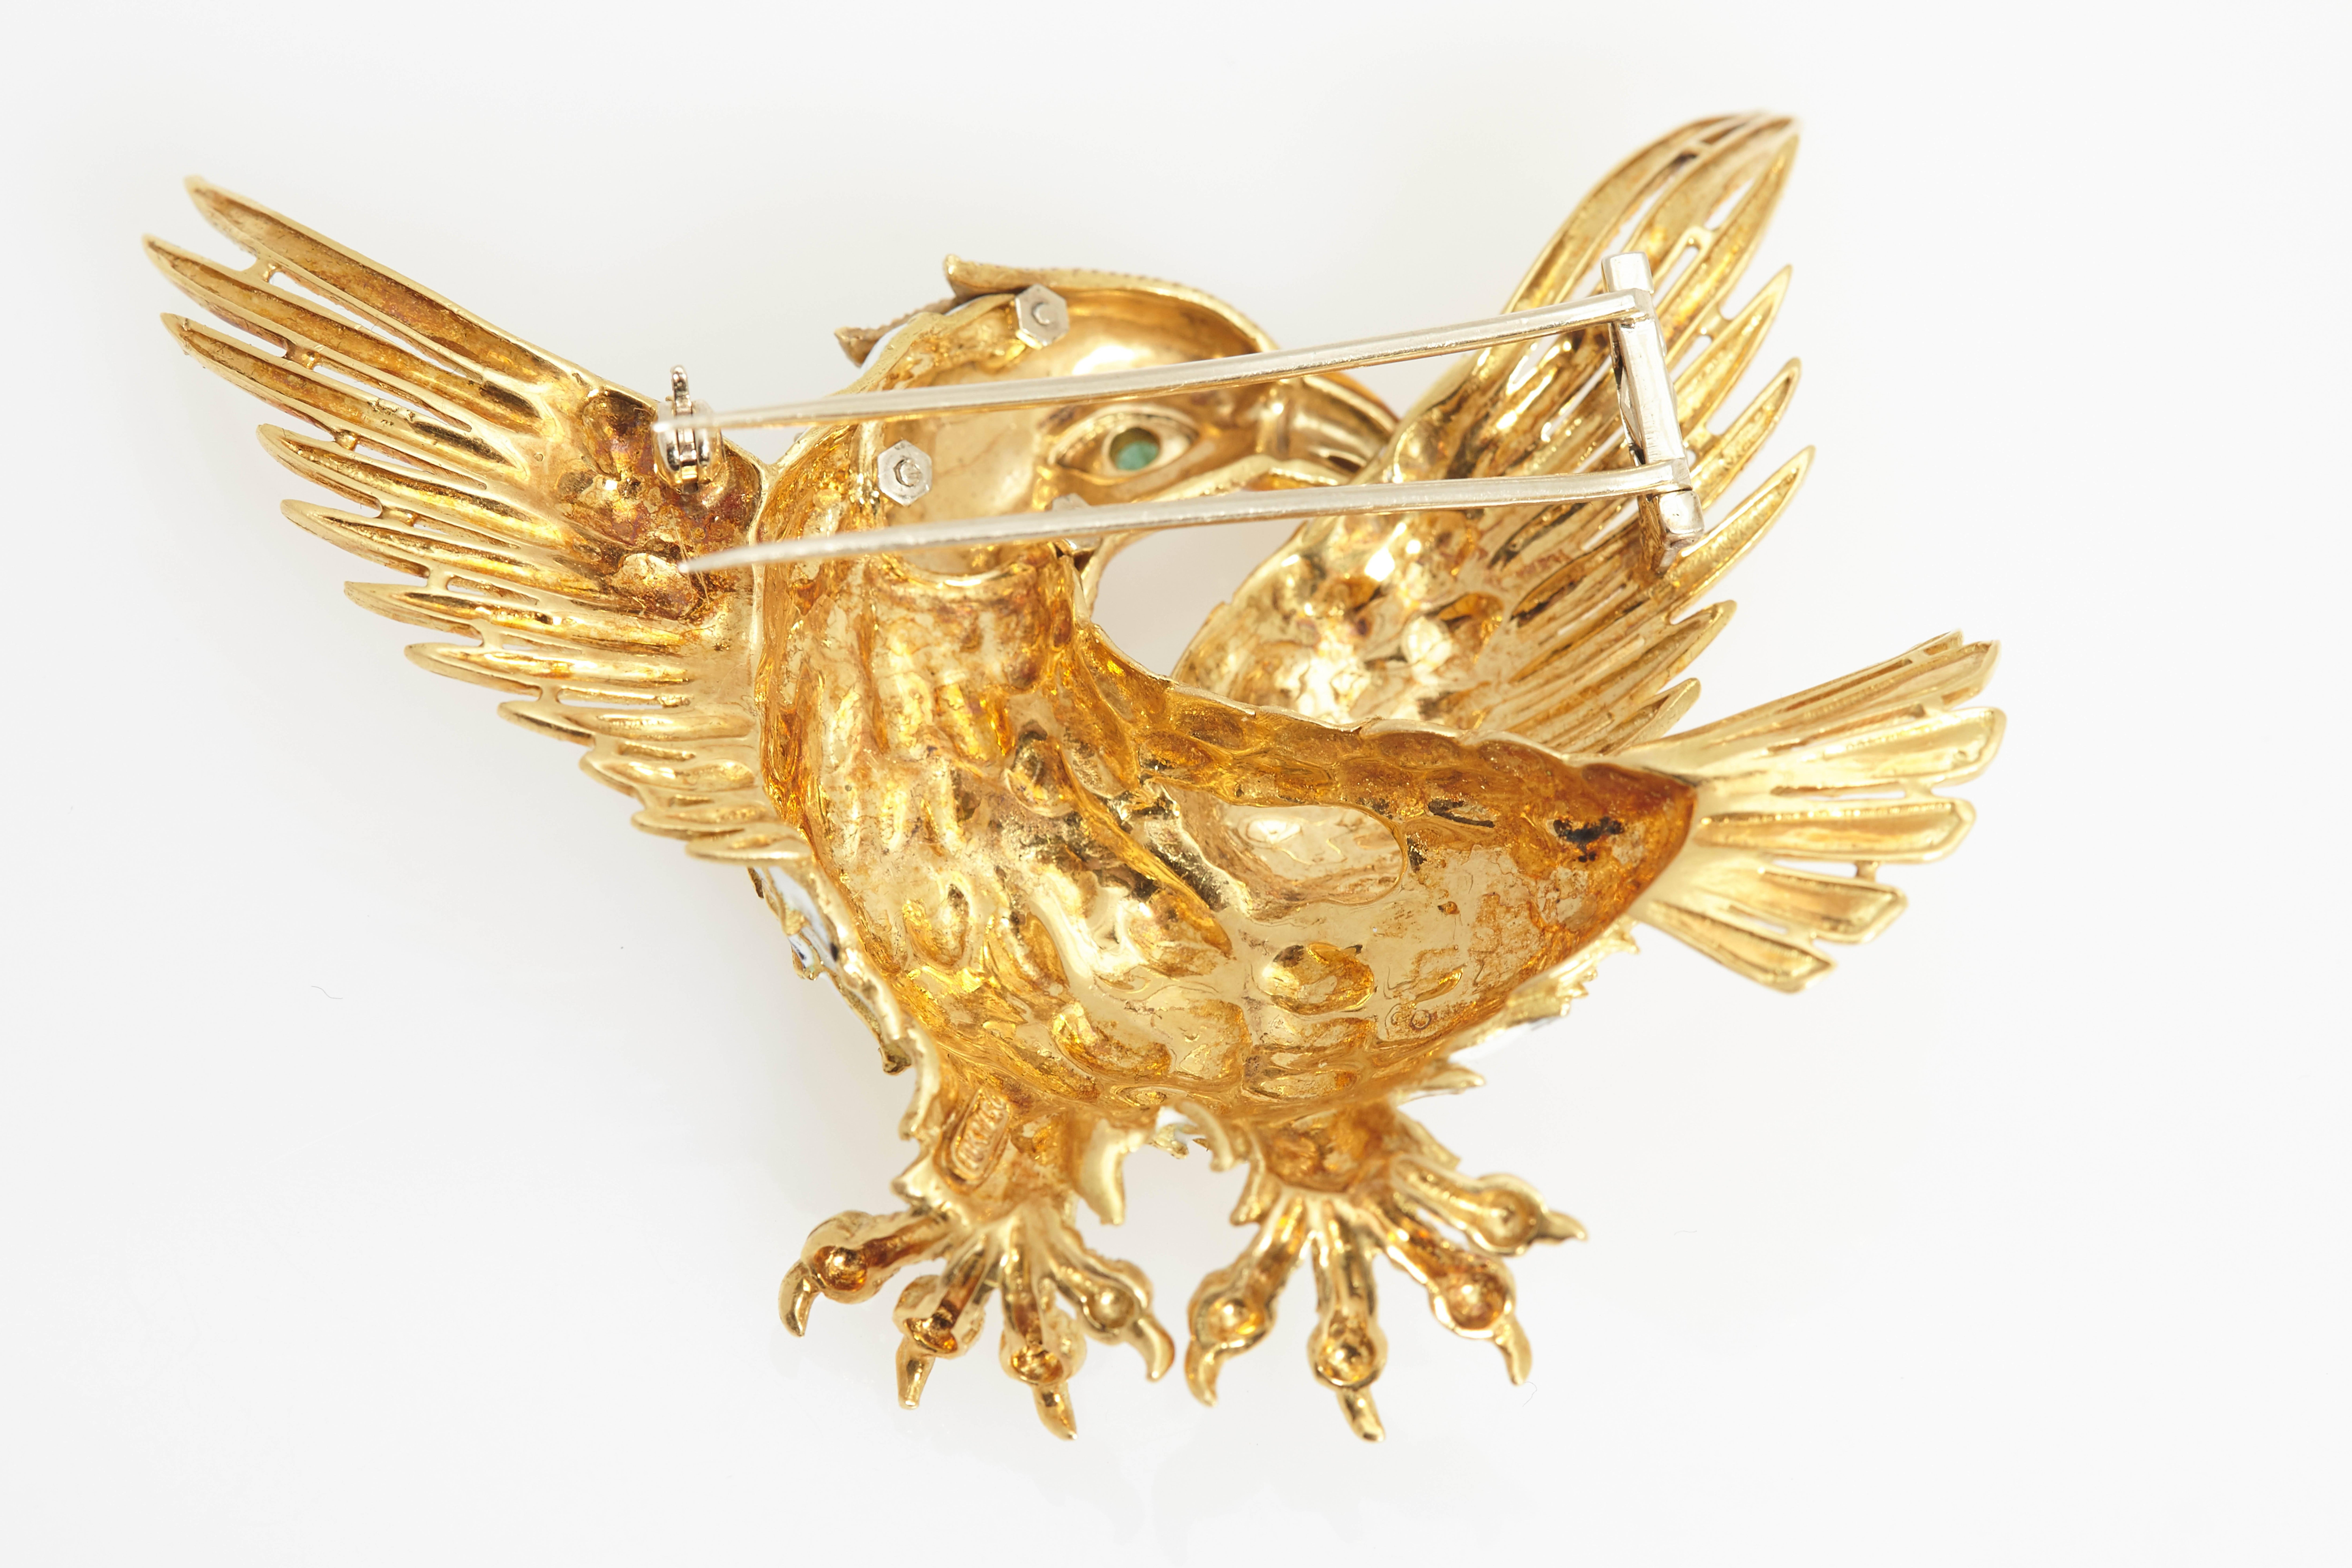 An Eagle Brooch made in 18kt yellow gold, with white, black and yellow enamels, highlighted by emerald eyes. Made in the United States, circa 1970.